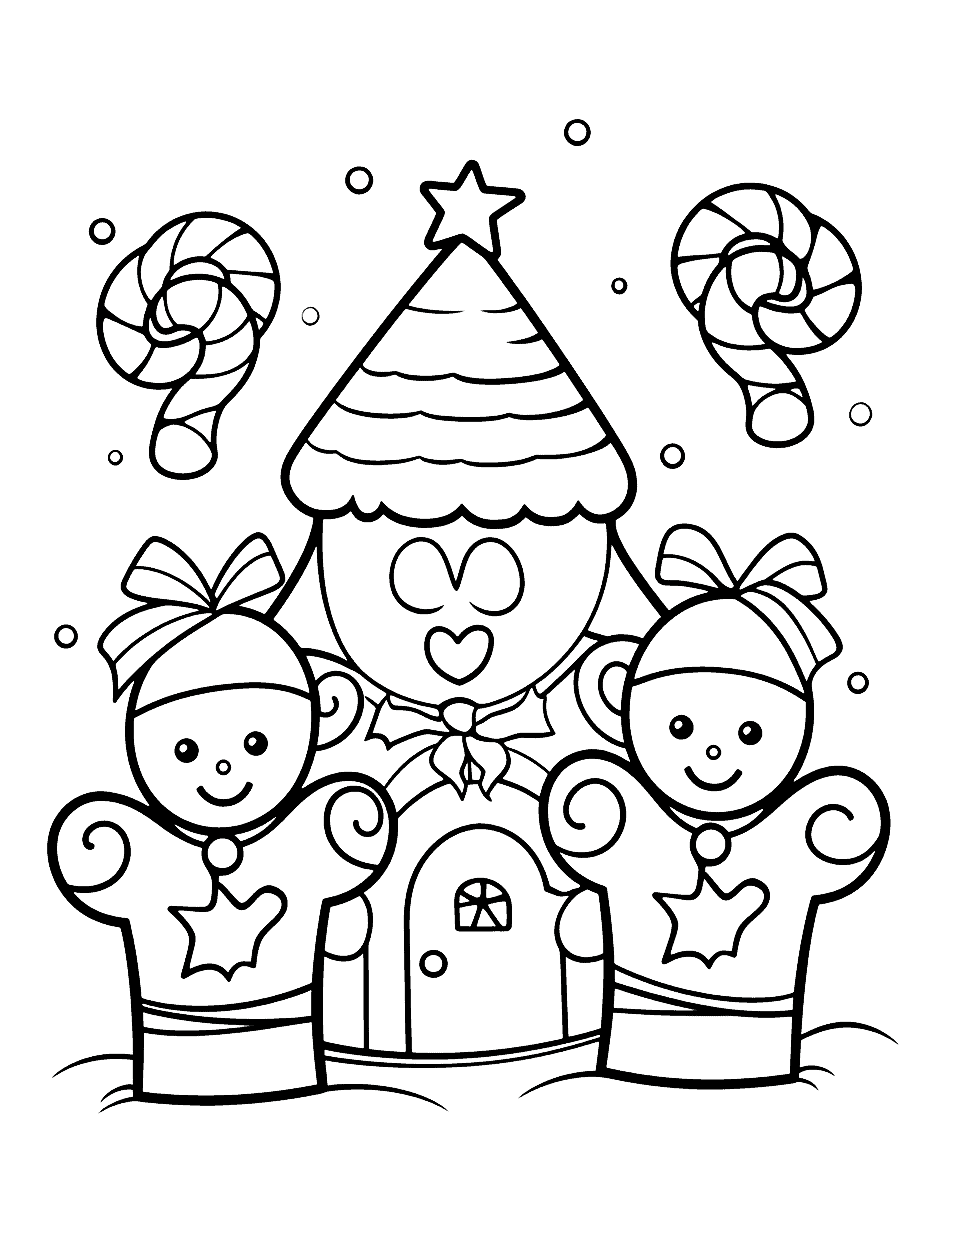 Gingerbread Family Christmas Coloring Page - A cute gingerbread family in front of their gingerbread house.